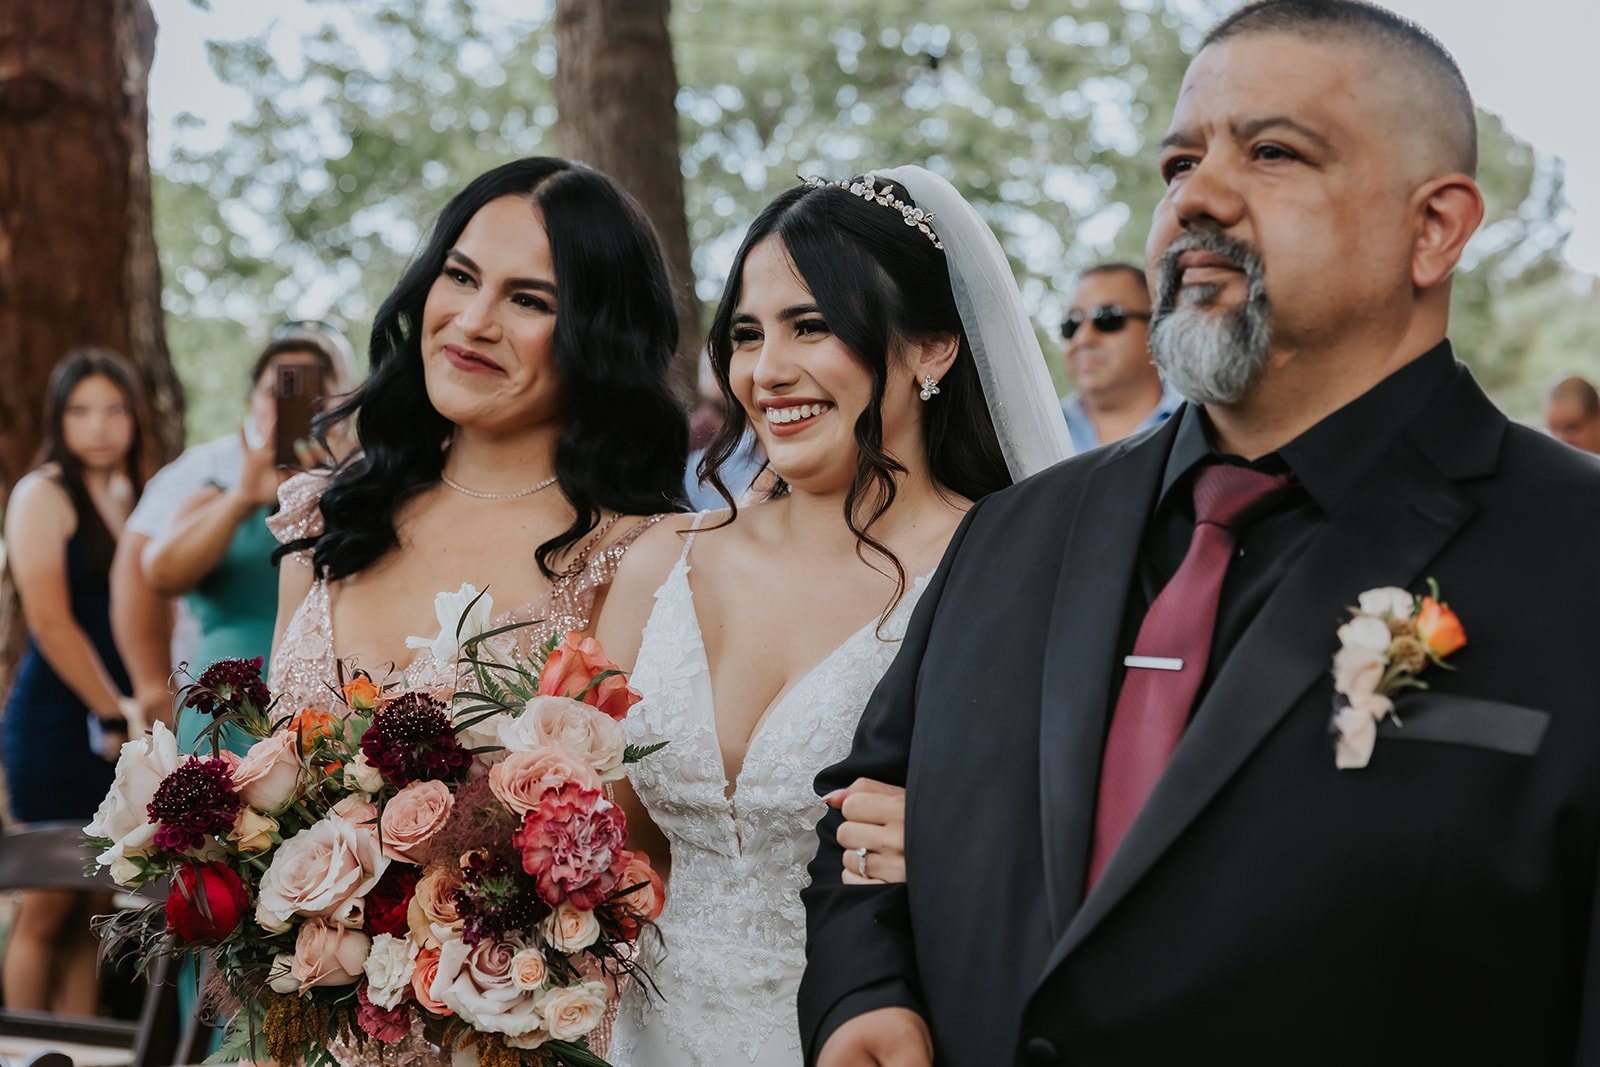 Bride smiling at the groom while walking down the aisle with her parents